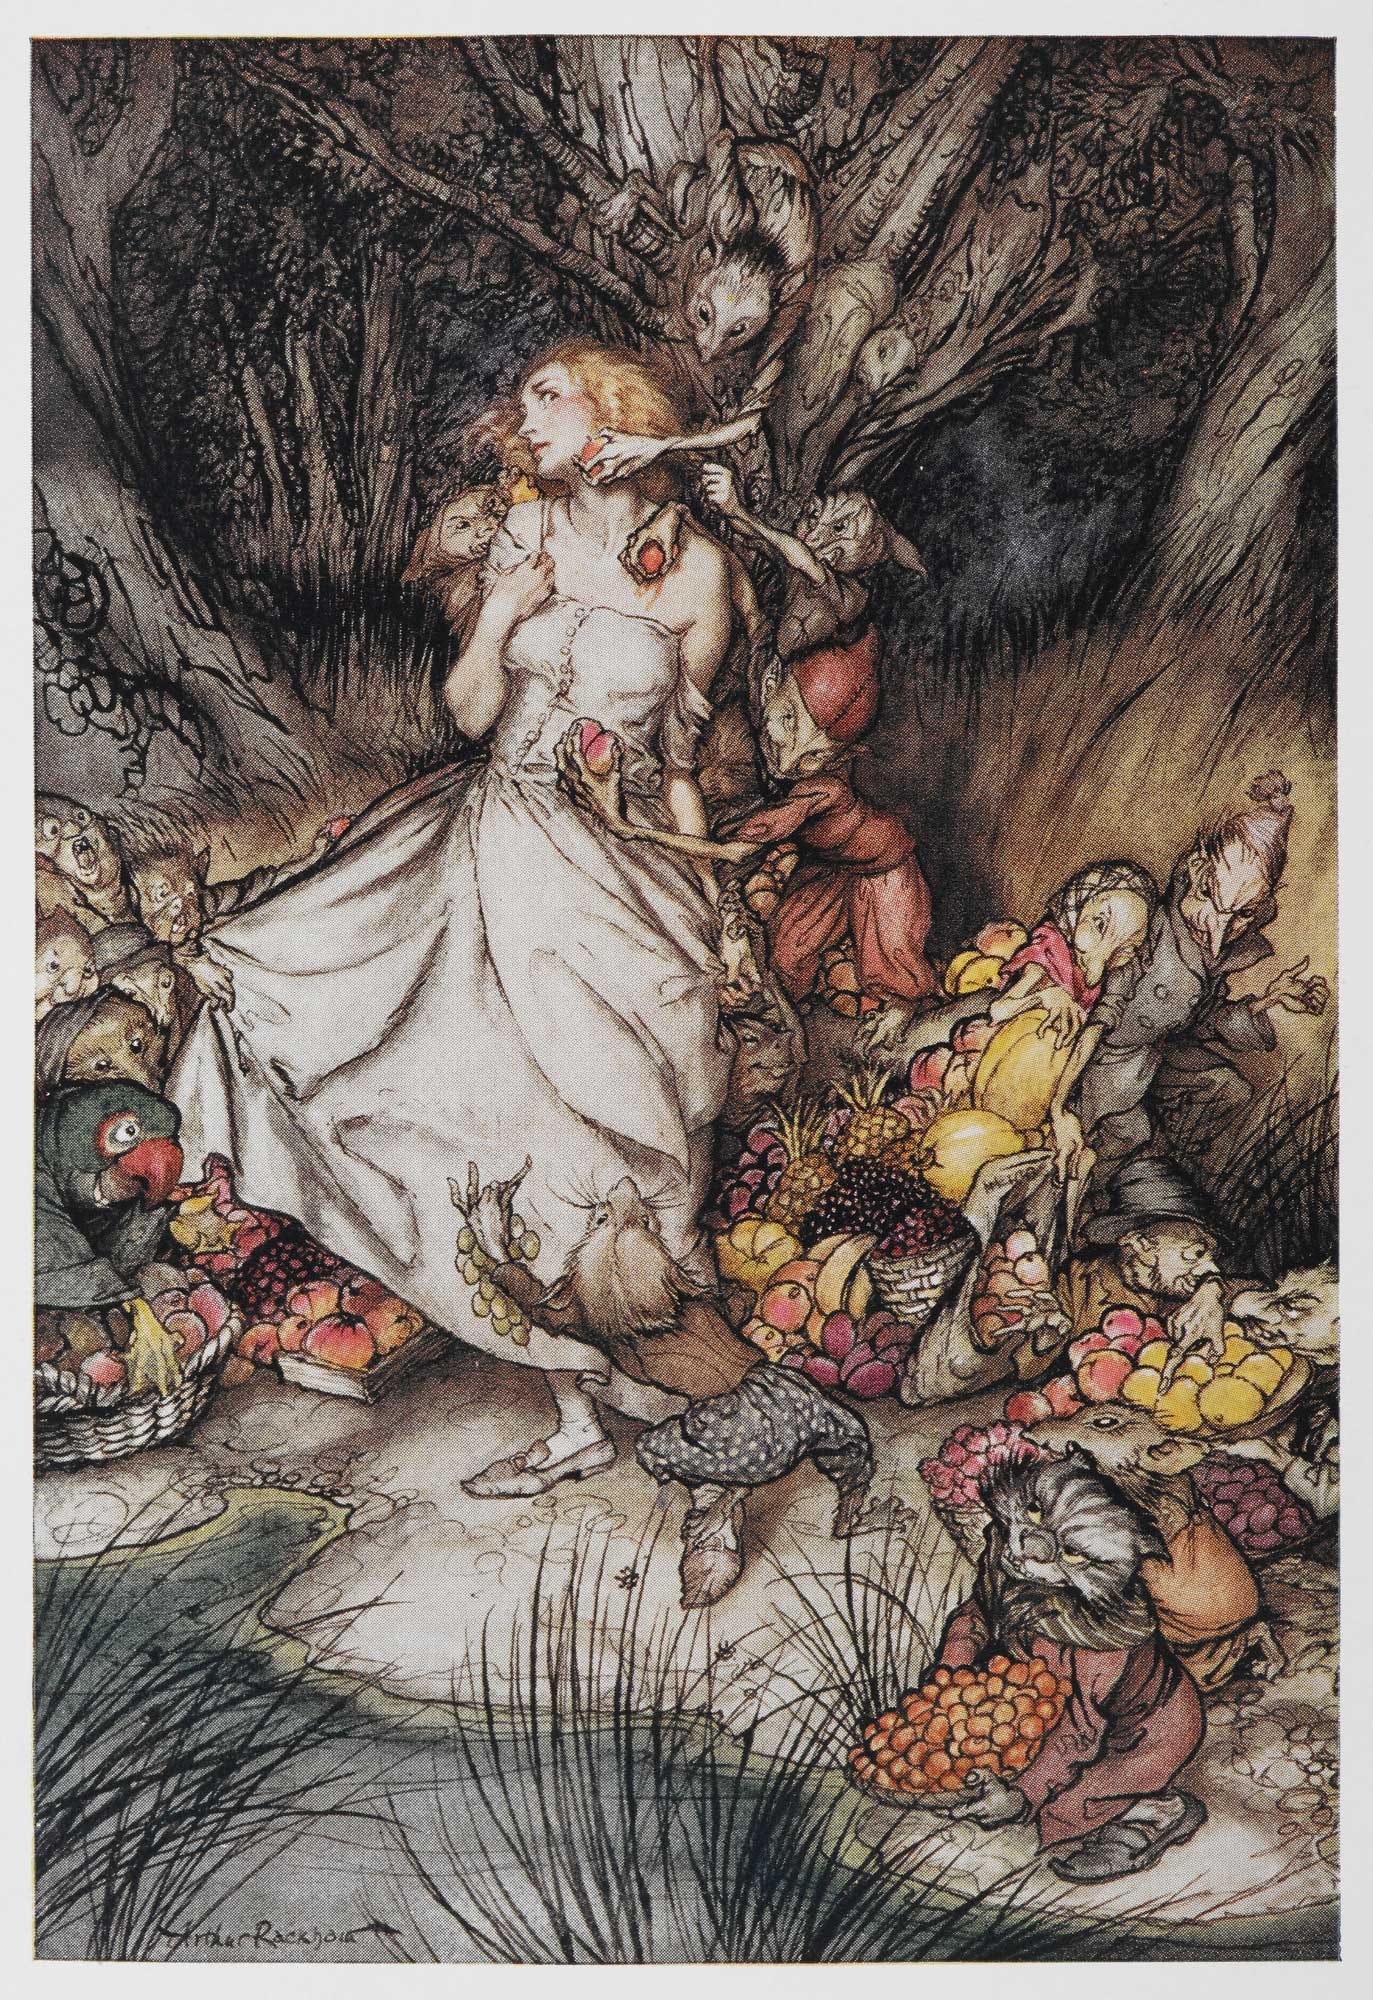 Christina Rossetti, in the face of finger-wagging critics, doubled down on Goblin Market actually actually being a childrens' poem.  So that happened.